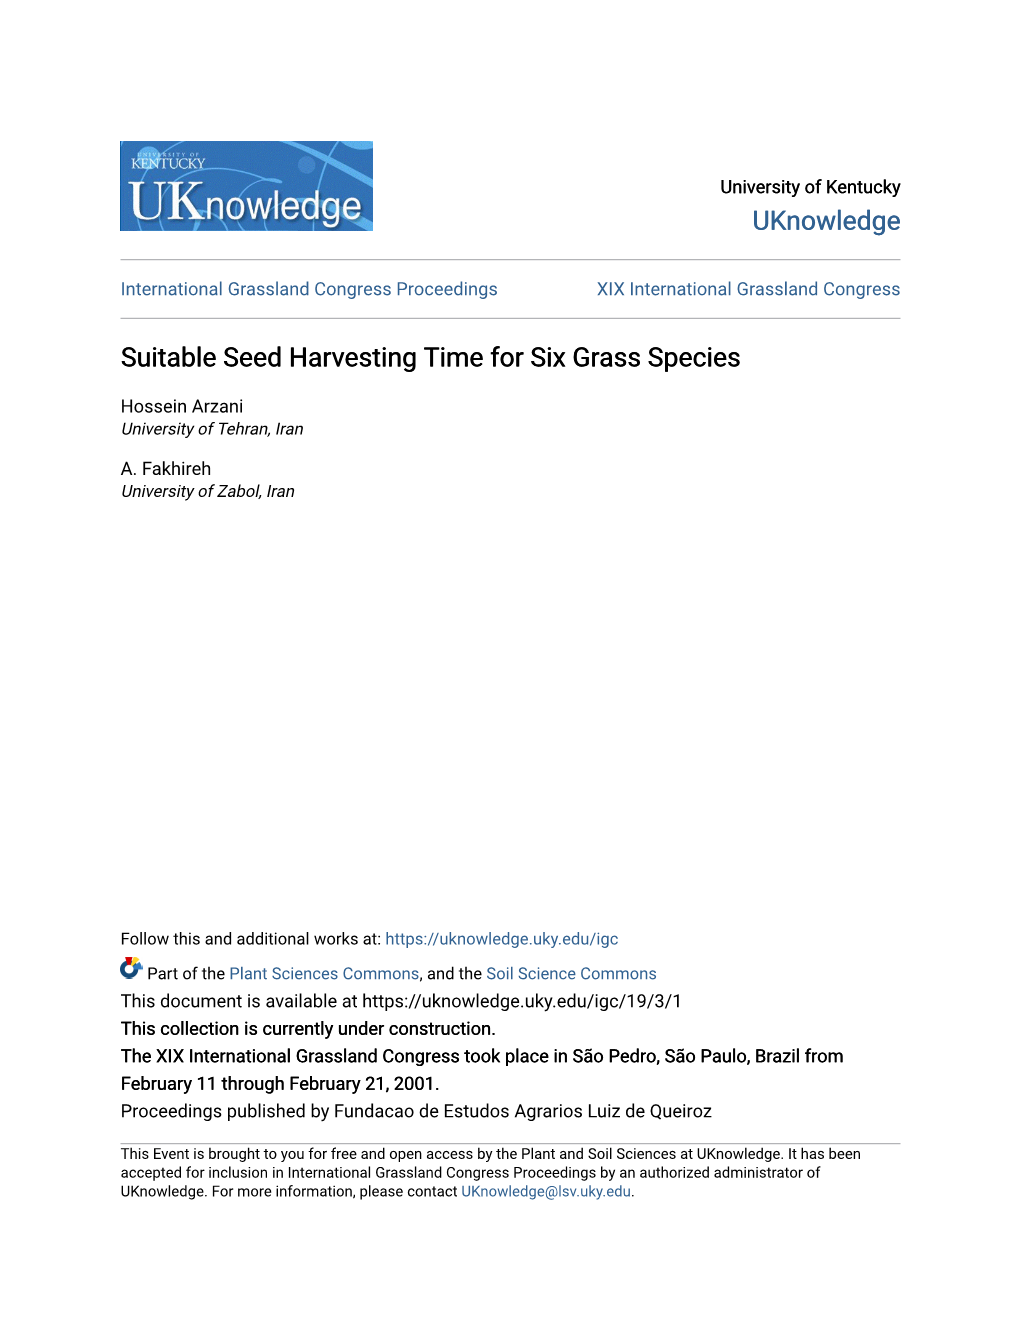 Suitable Seed Harvesting Time for Six Grass Species